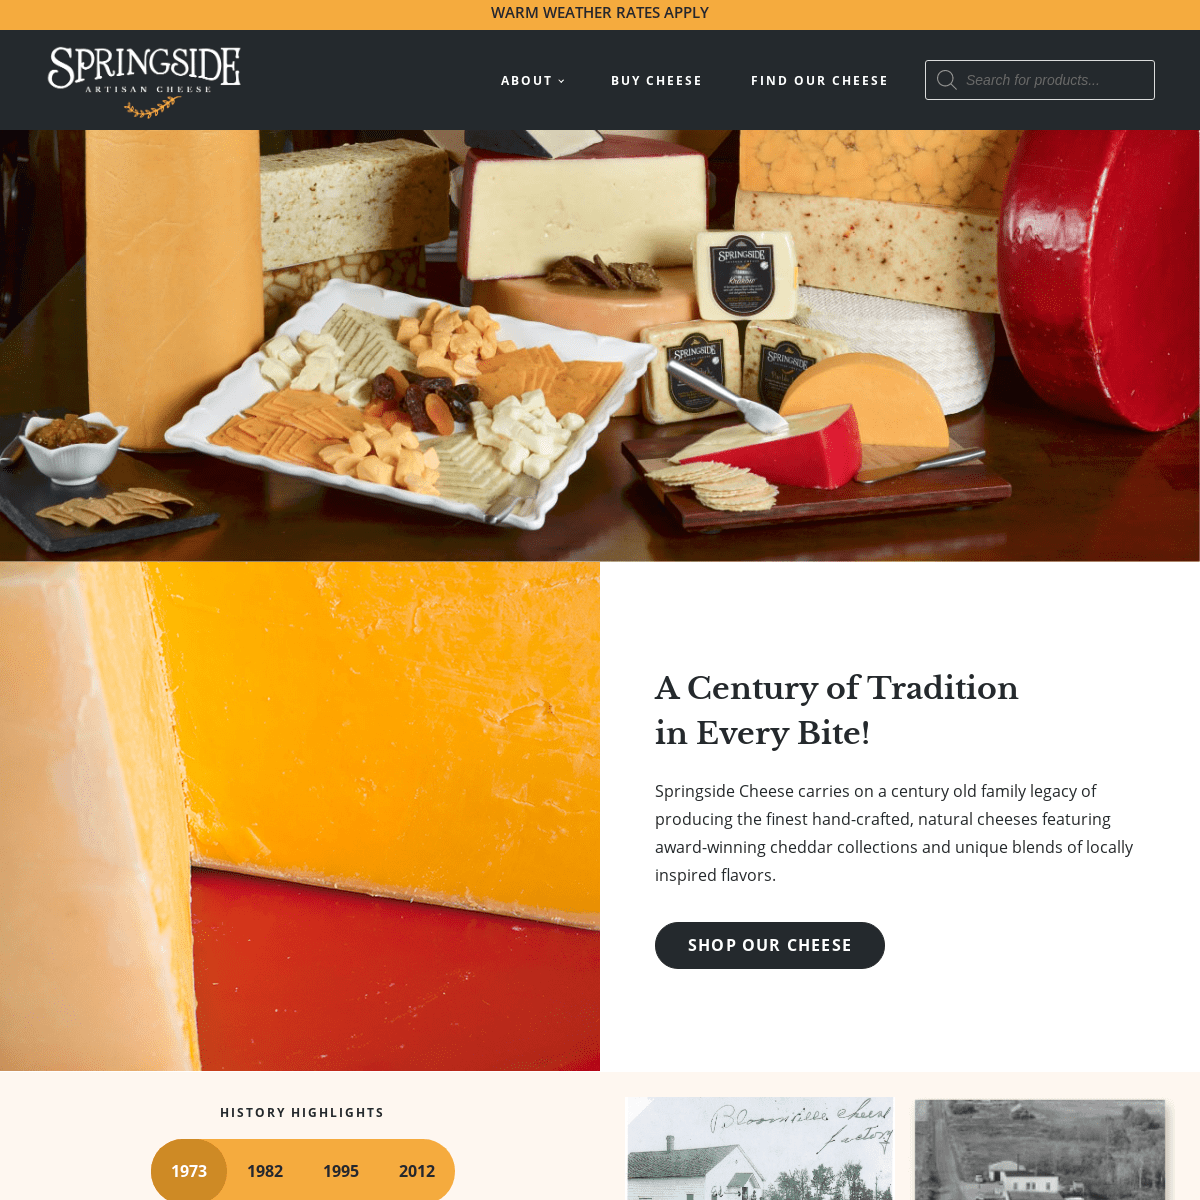 A complete backup of springsidecheese.com